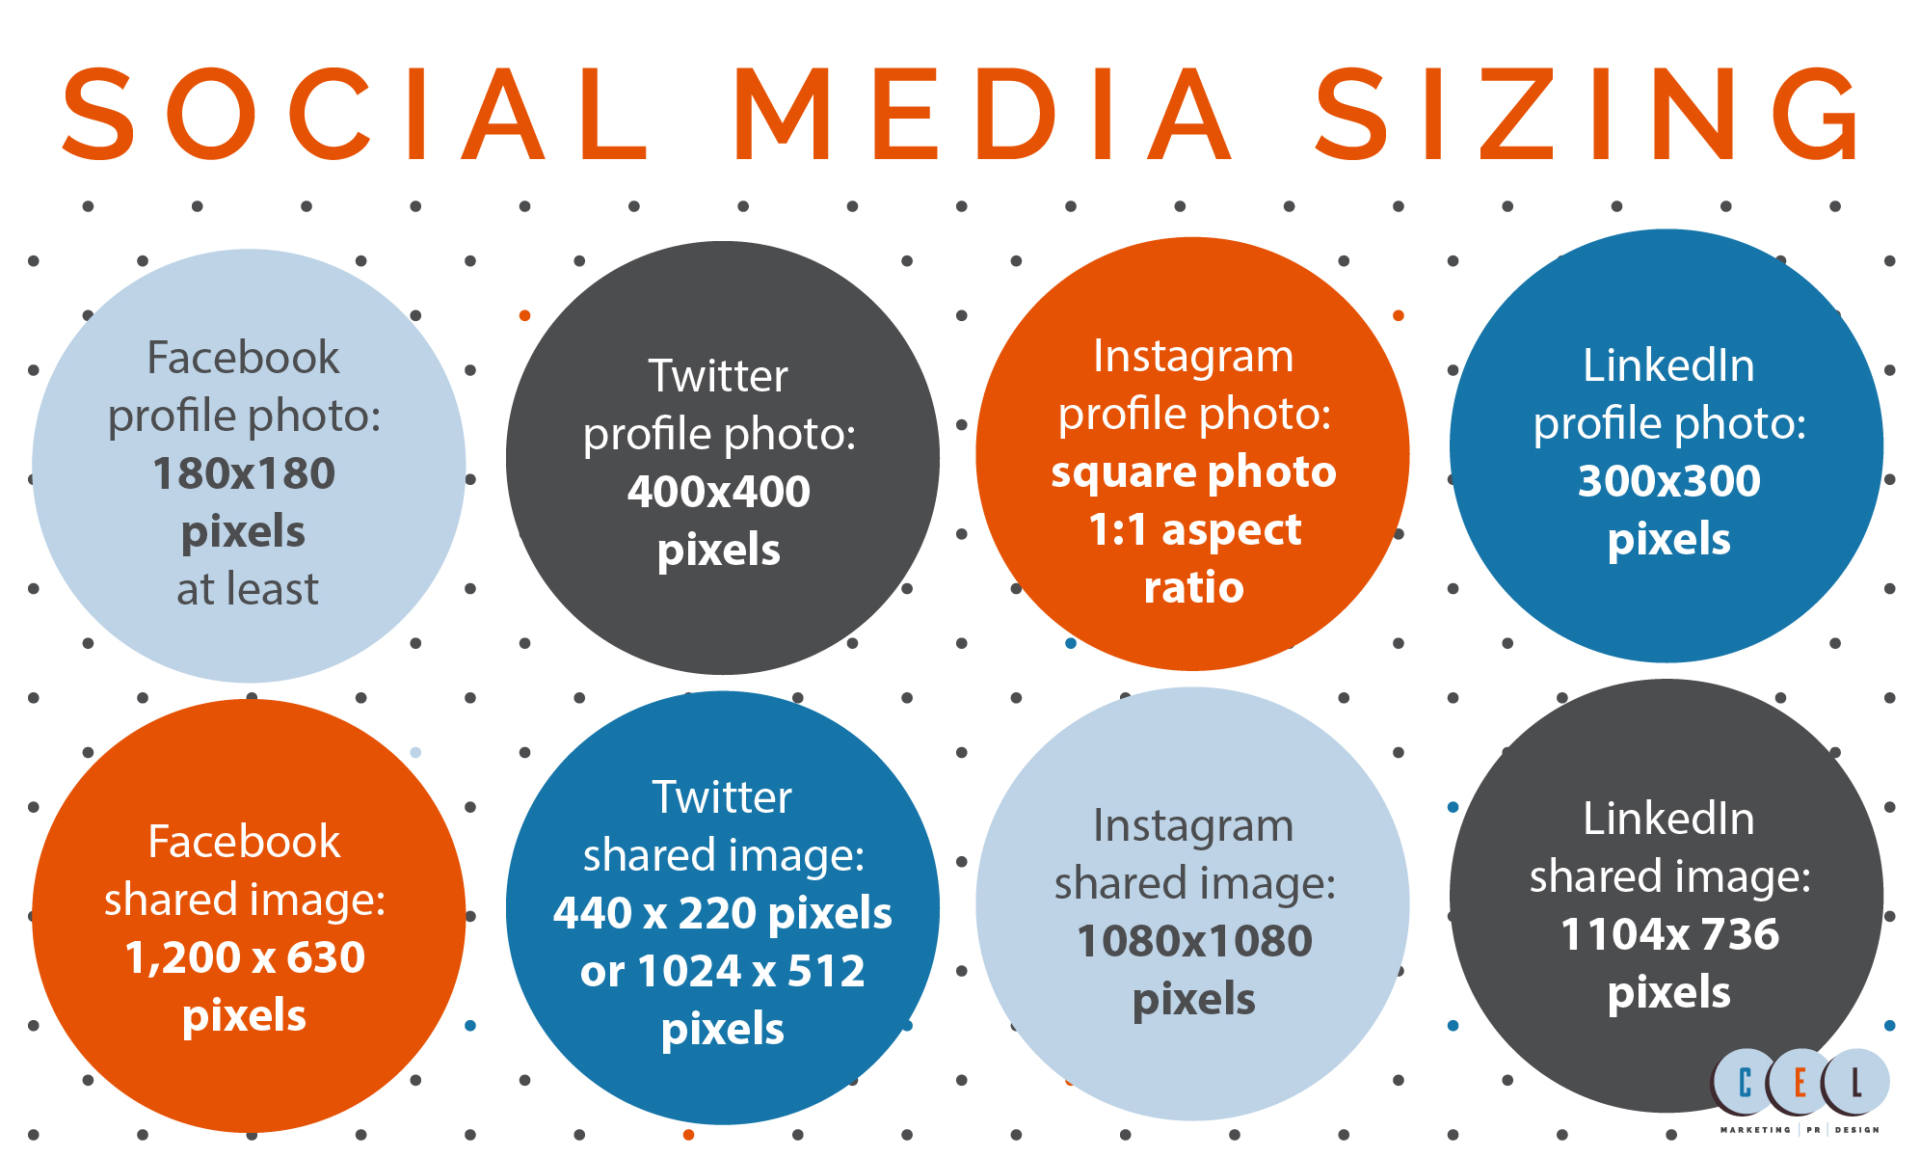 Infographic displaying social media sizes